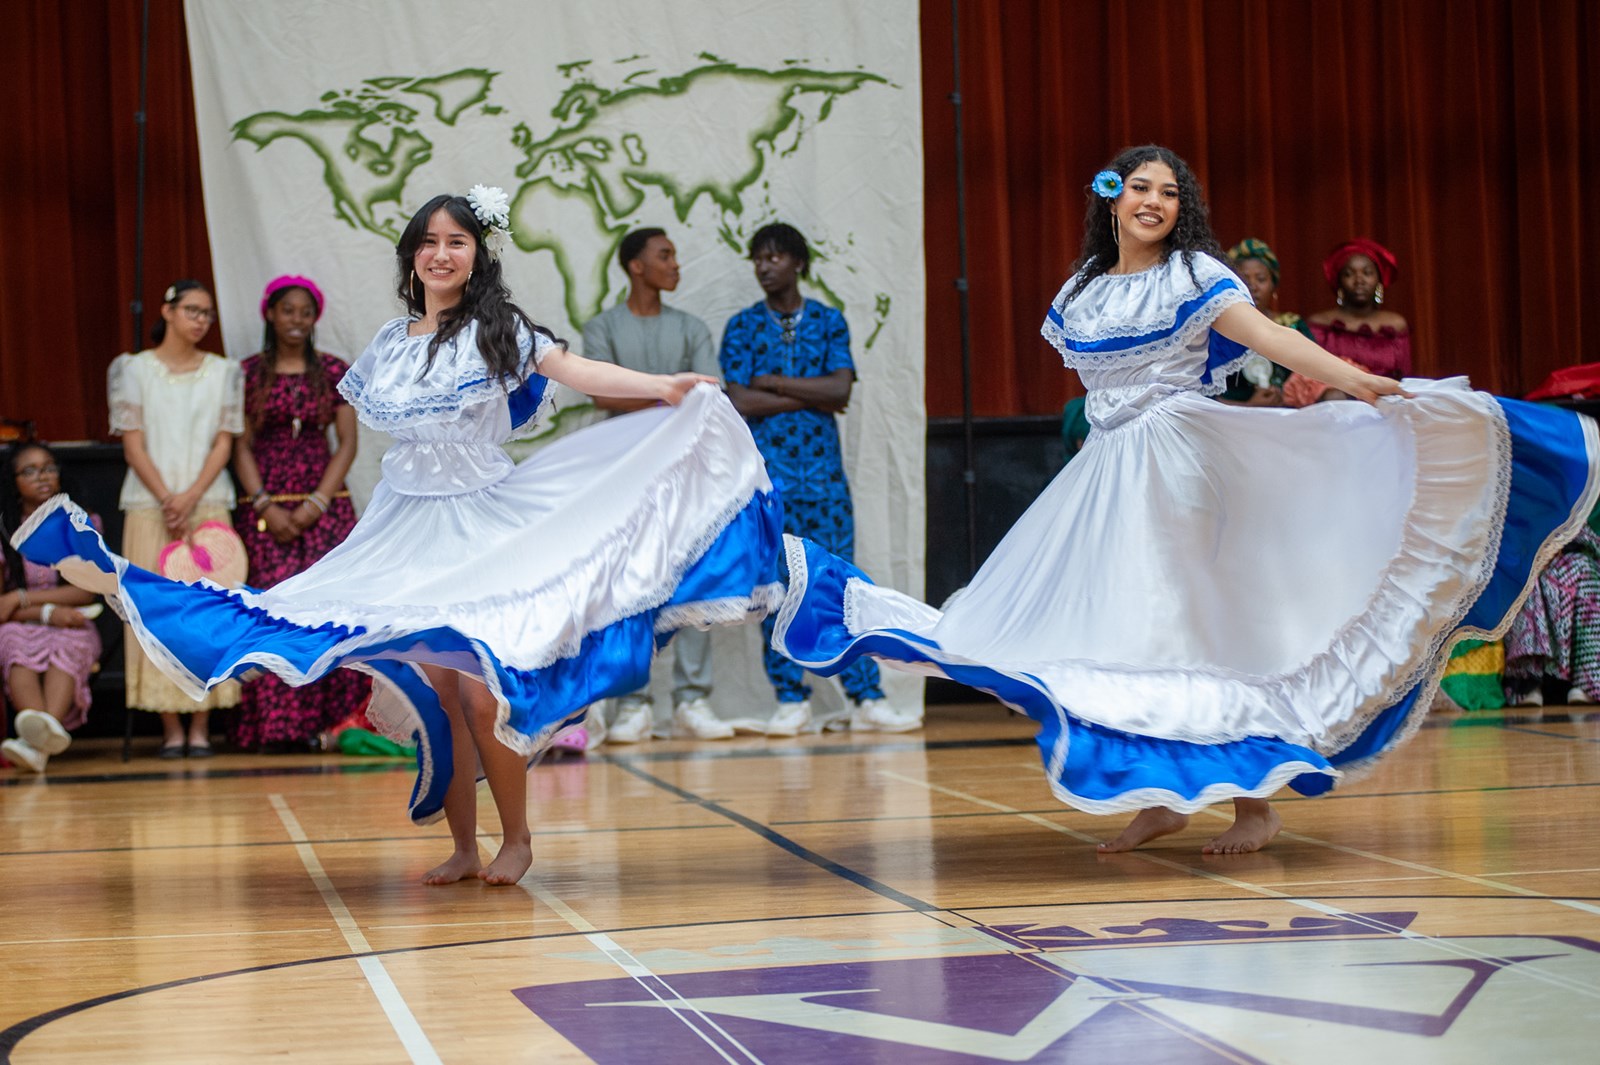 Two female students perform a Columbian dance wearing blue and white dresses that twirl through the air as they spin.